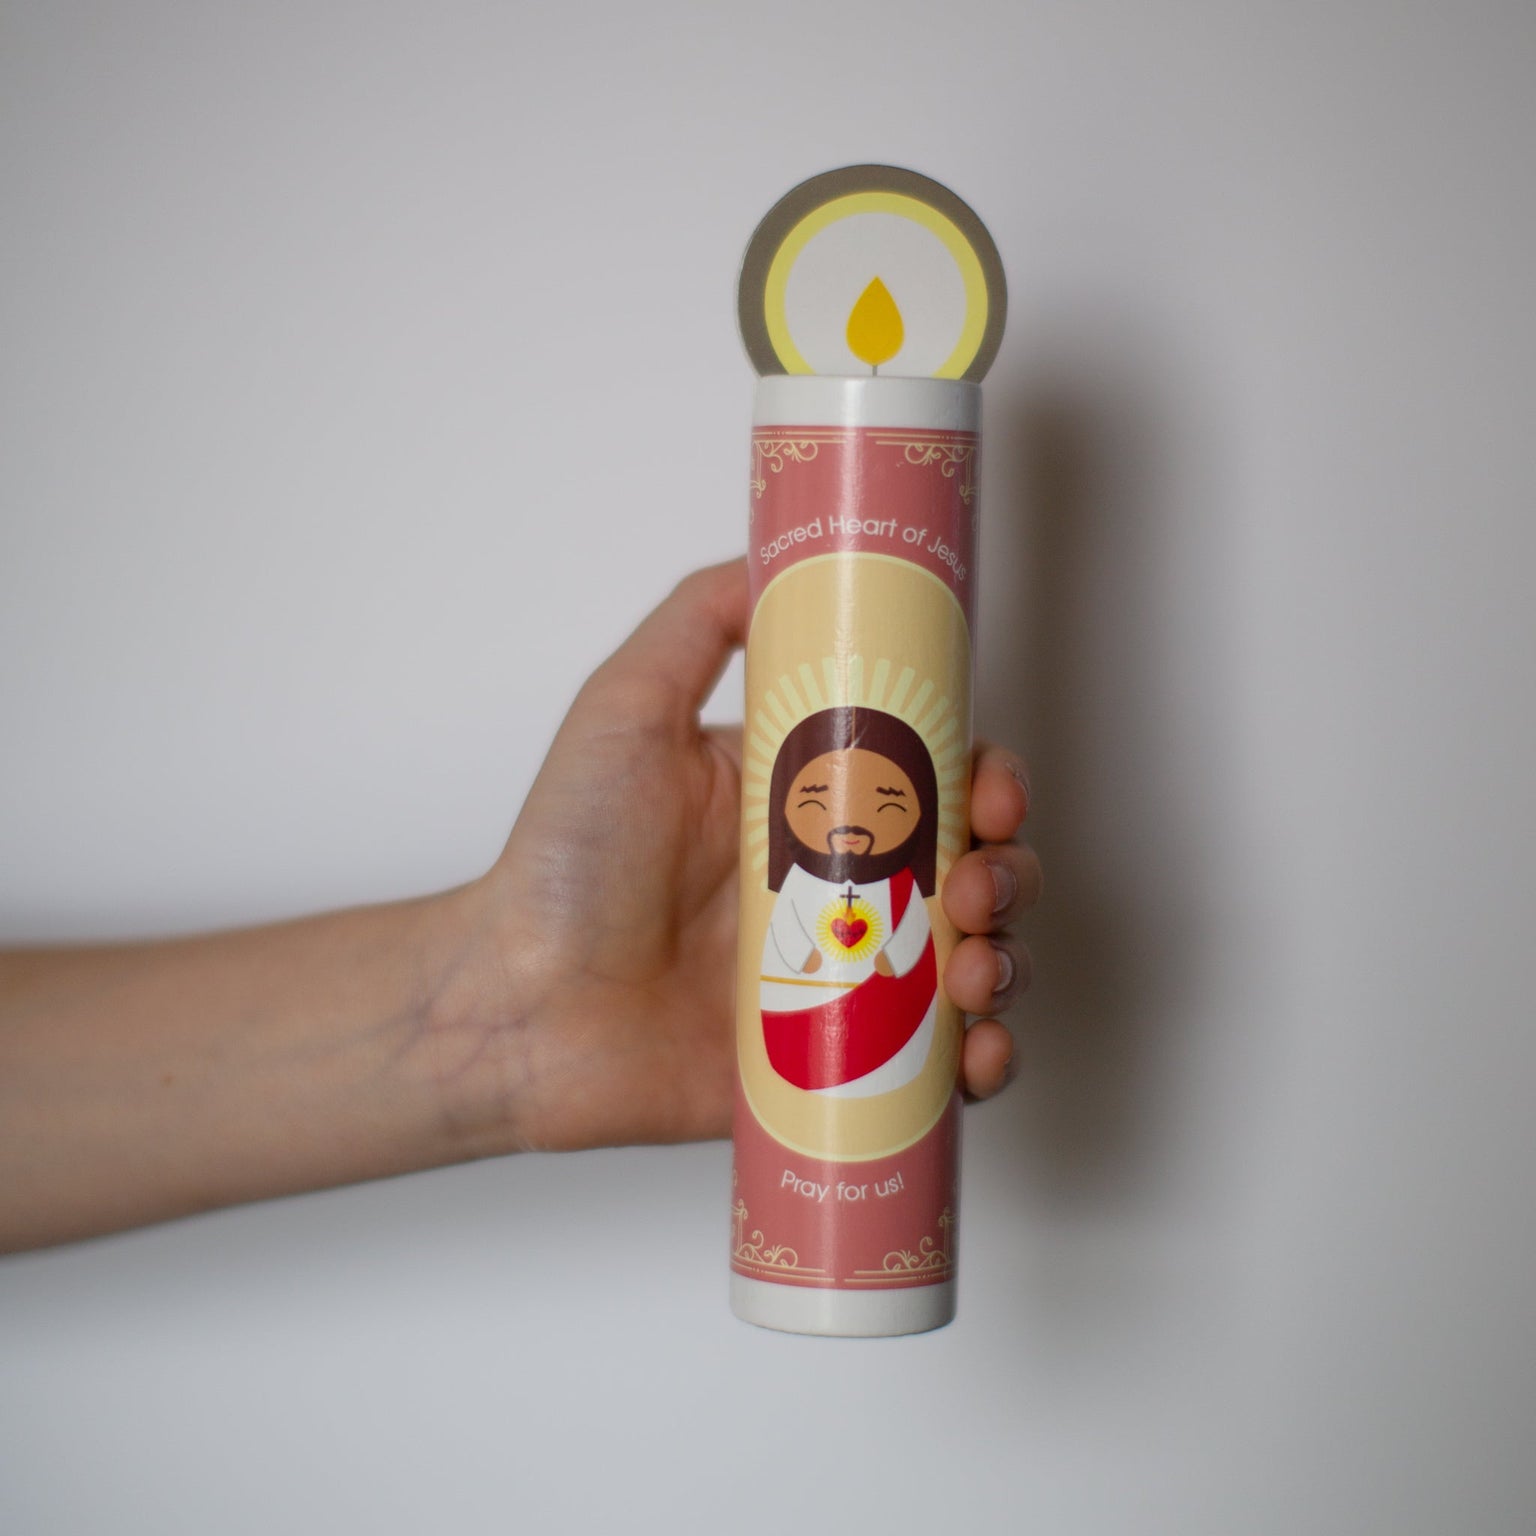 Sacred Heart of Jesus Wooden Prayer Candle